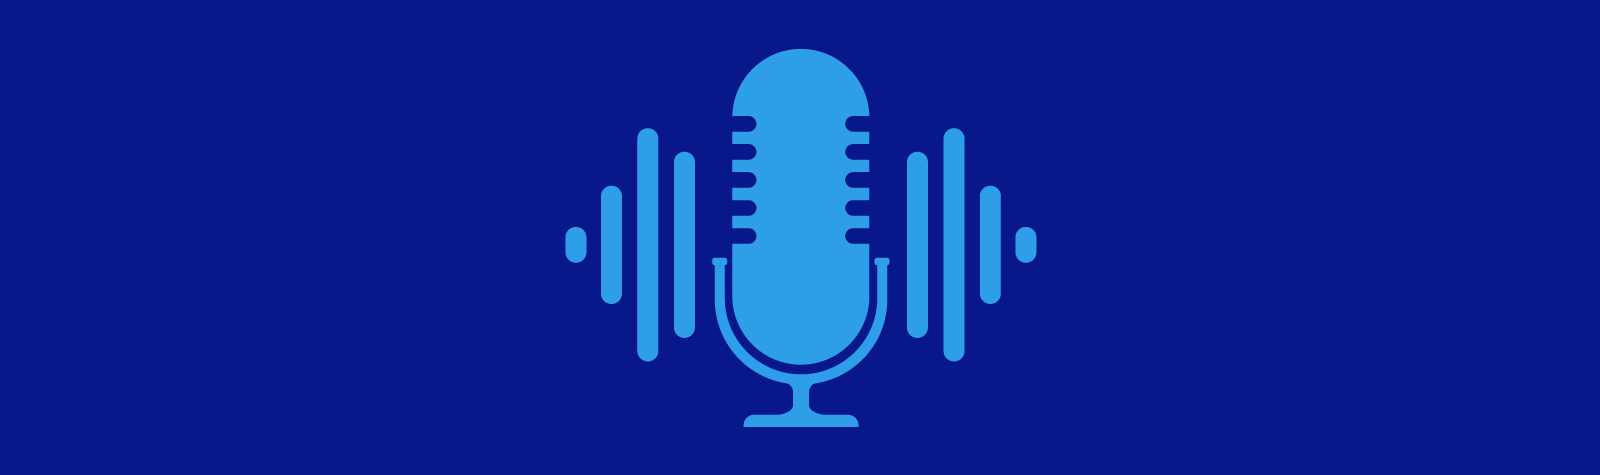 Podcast – Mastering Sales Success Through Controlling the Basics